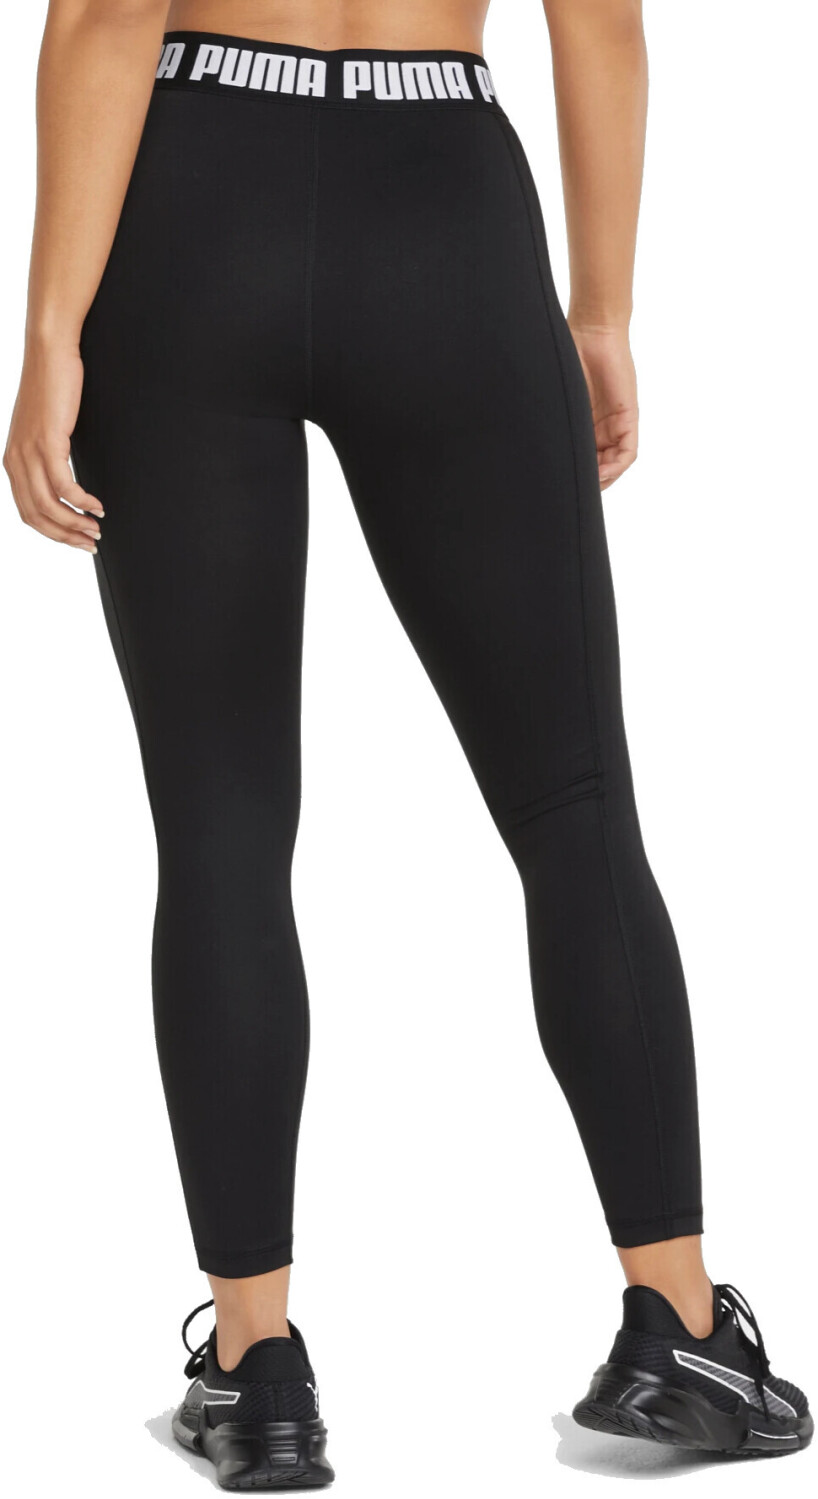 Buy Puma Leggings Strong High Waist Full (521601) puma black from £12.00  (Today) – Best Deals on